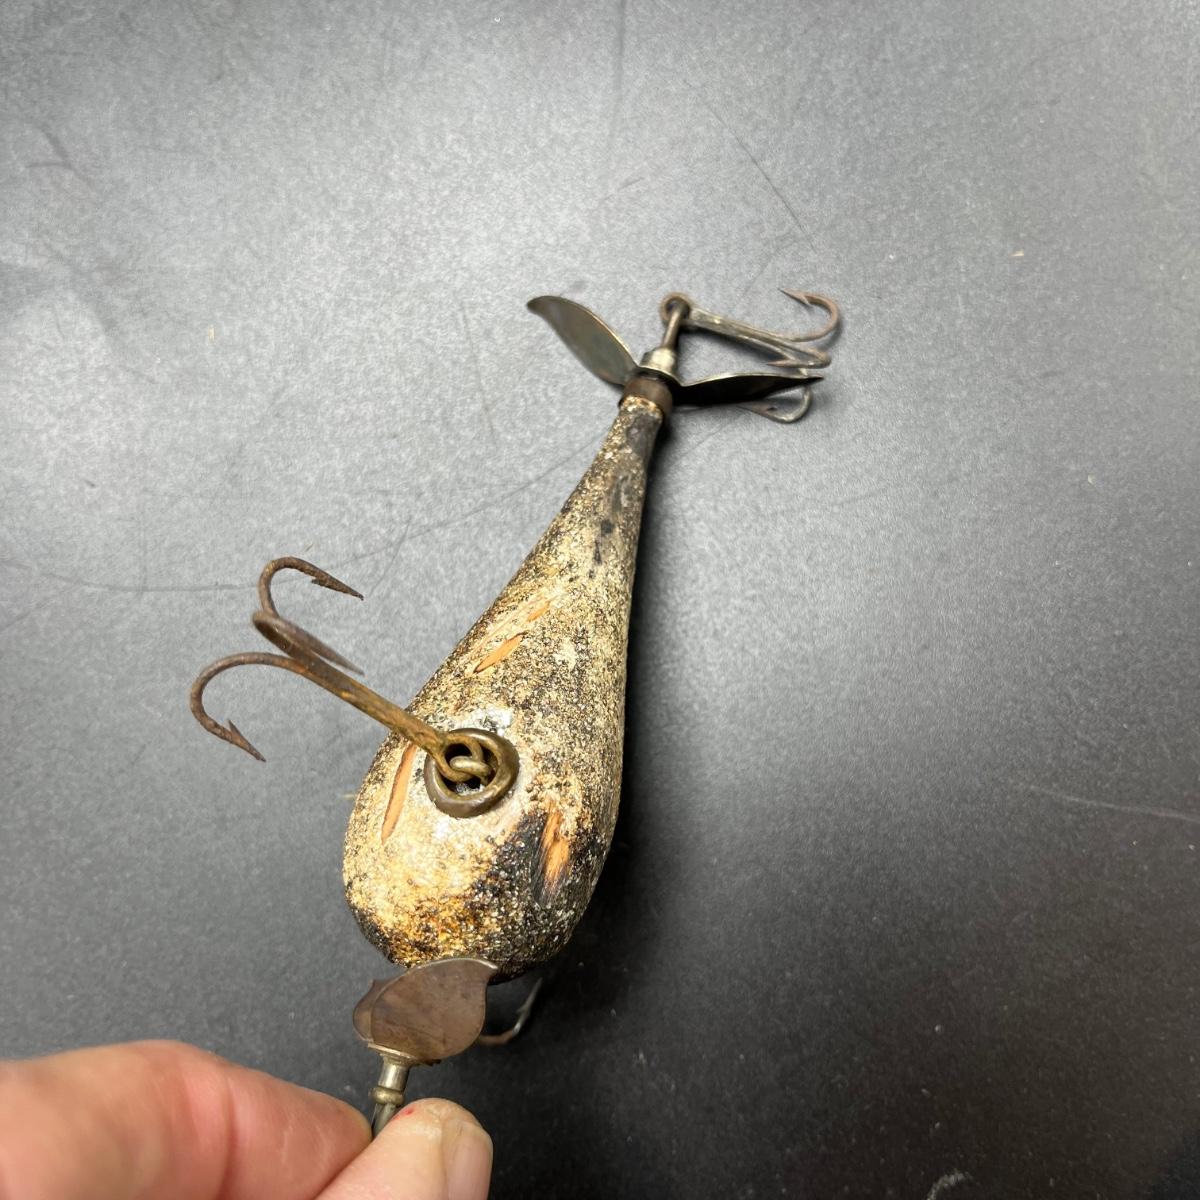 Rare 1913 Special Fishing Lure from Moonlight Bait Company (LF-MG)